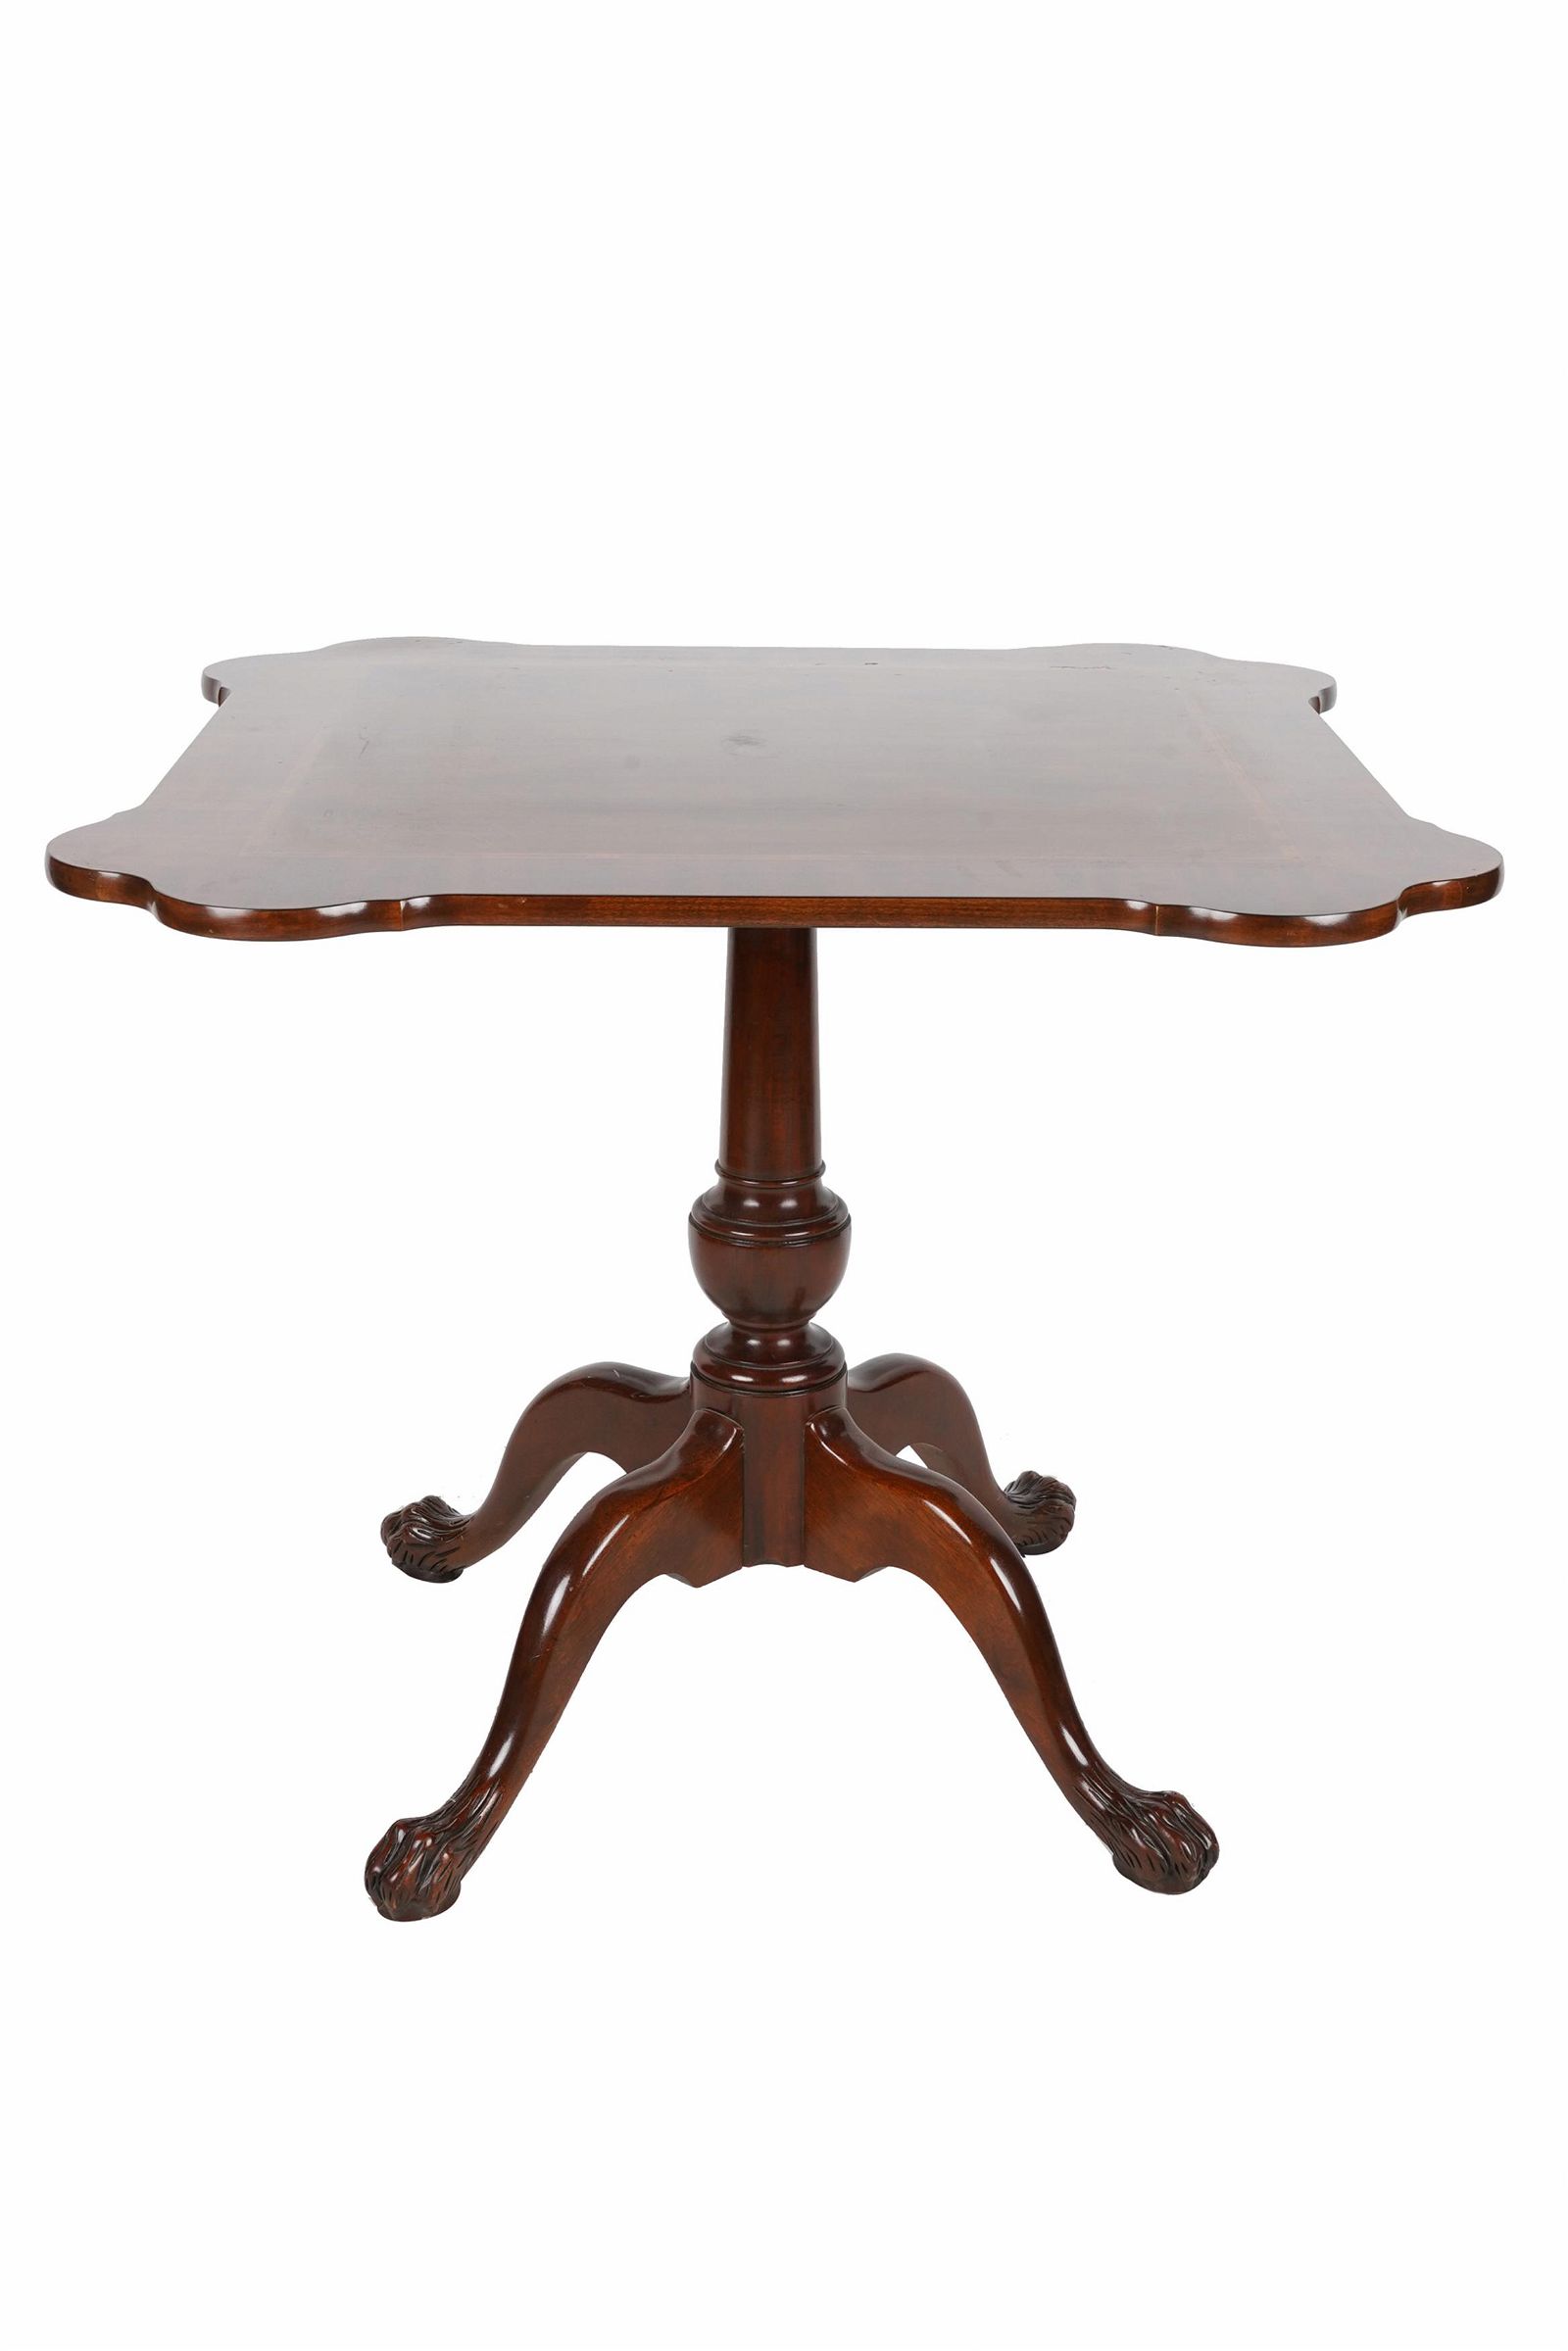 BAKER CHIPPENDALE STYLE MAHOGANY 397187